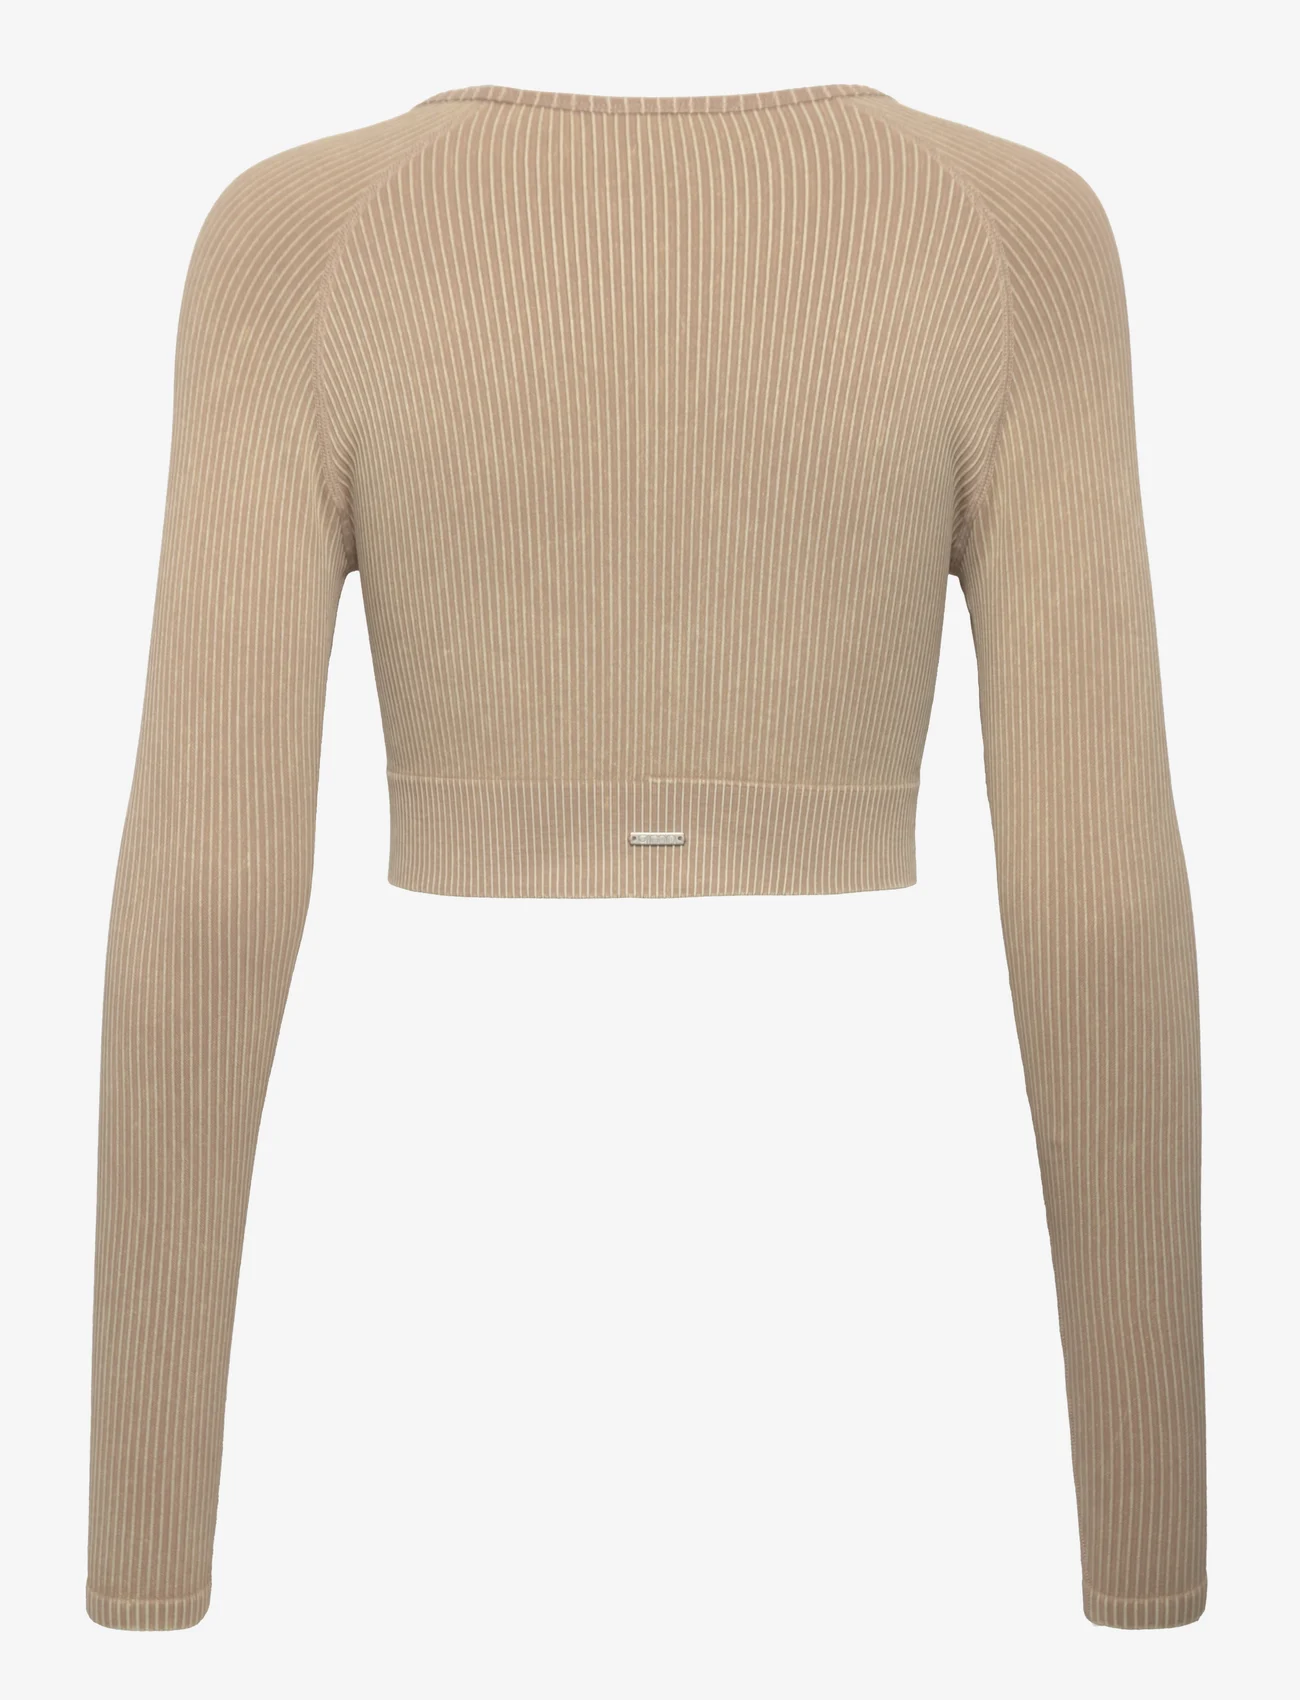 AIM'N - Sand Washed Ribbed Seamless Crop Long Sleeve - crop-tops - sand washed - 1